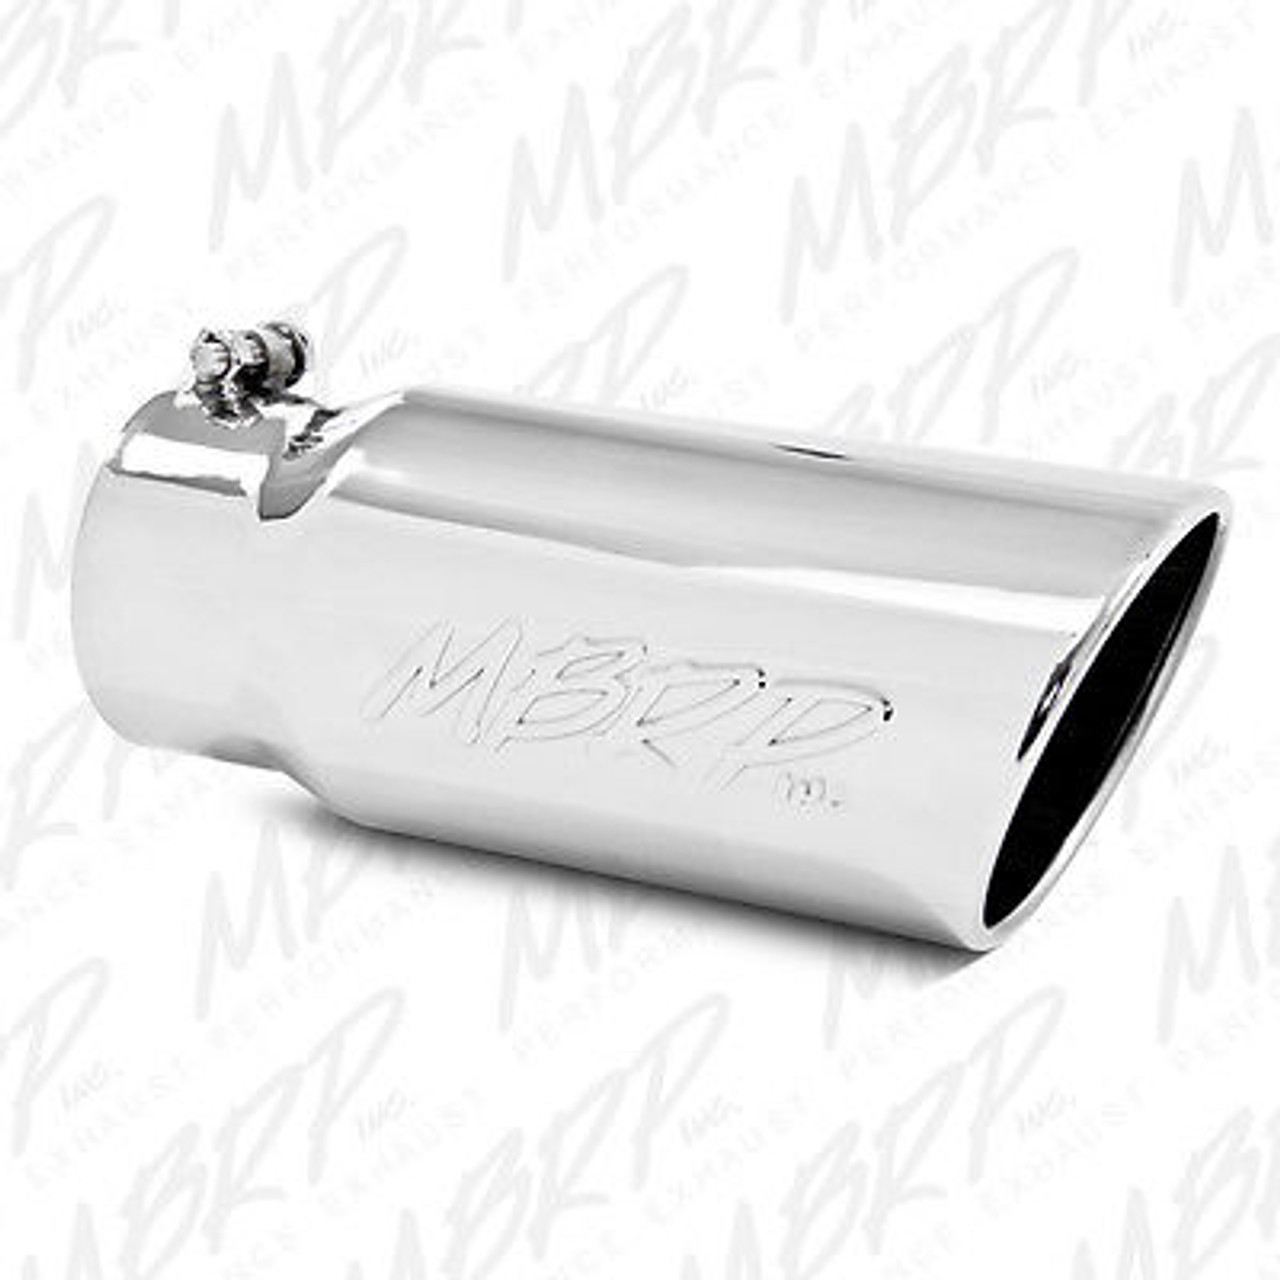 MBRP 4" CAT BACK EXHAUST FOR 2004.5-2007 DODGE RAM CUMMINS DIESEL 5.9L STAINLESS - S6108409